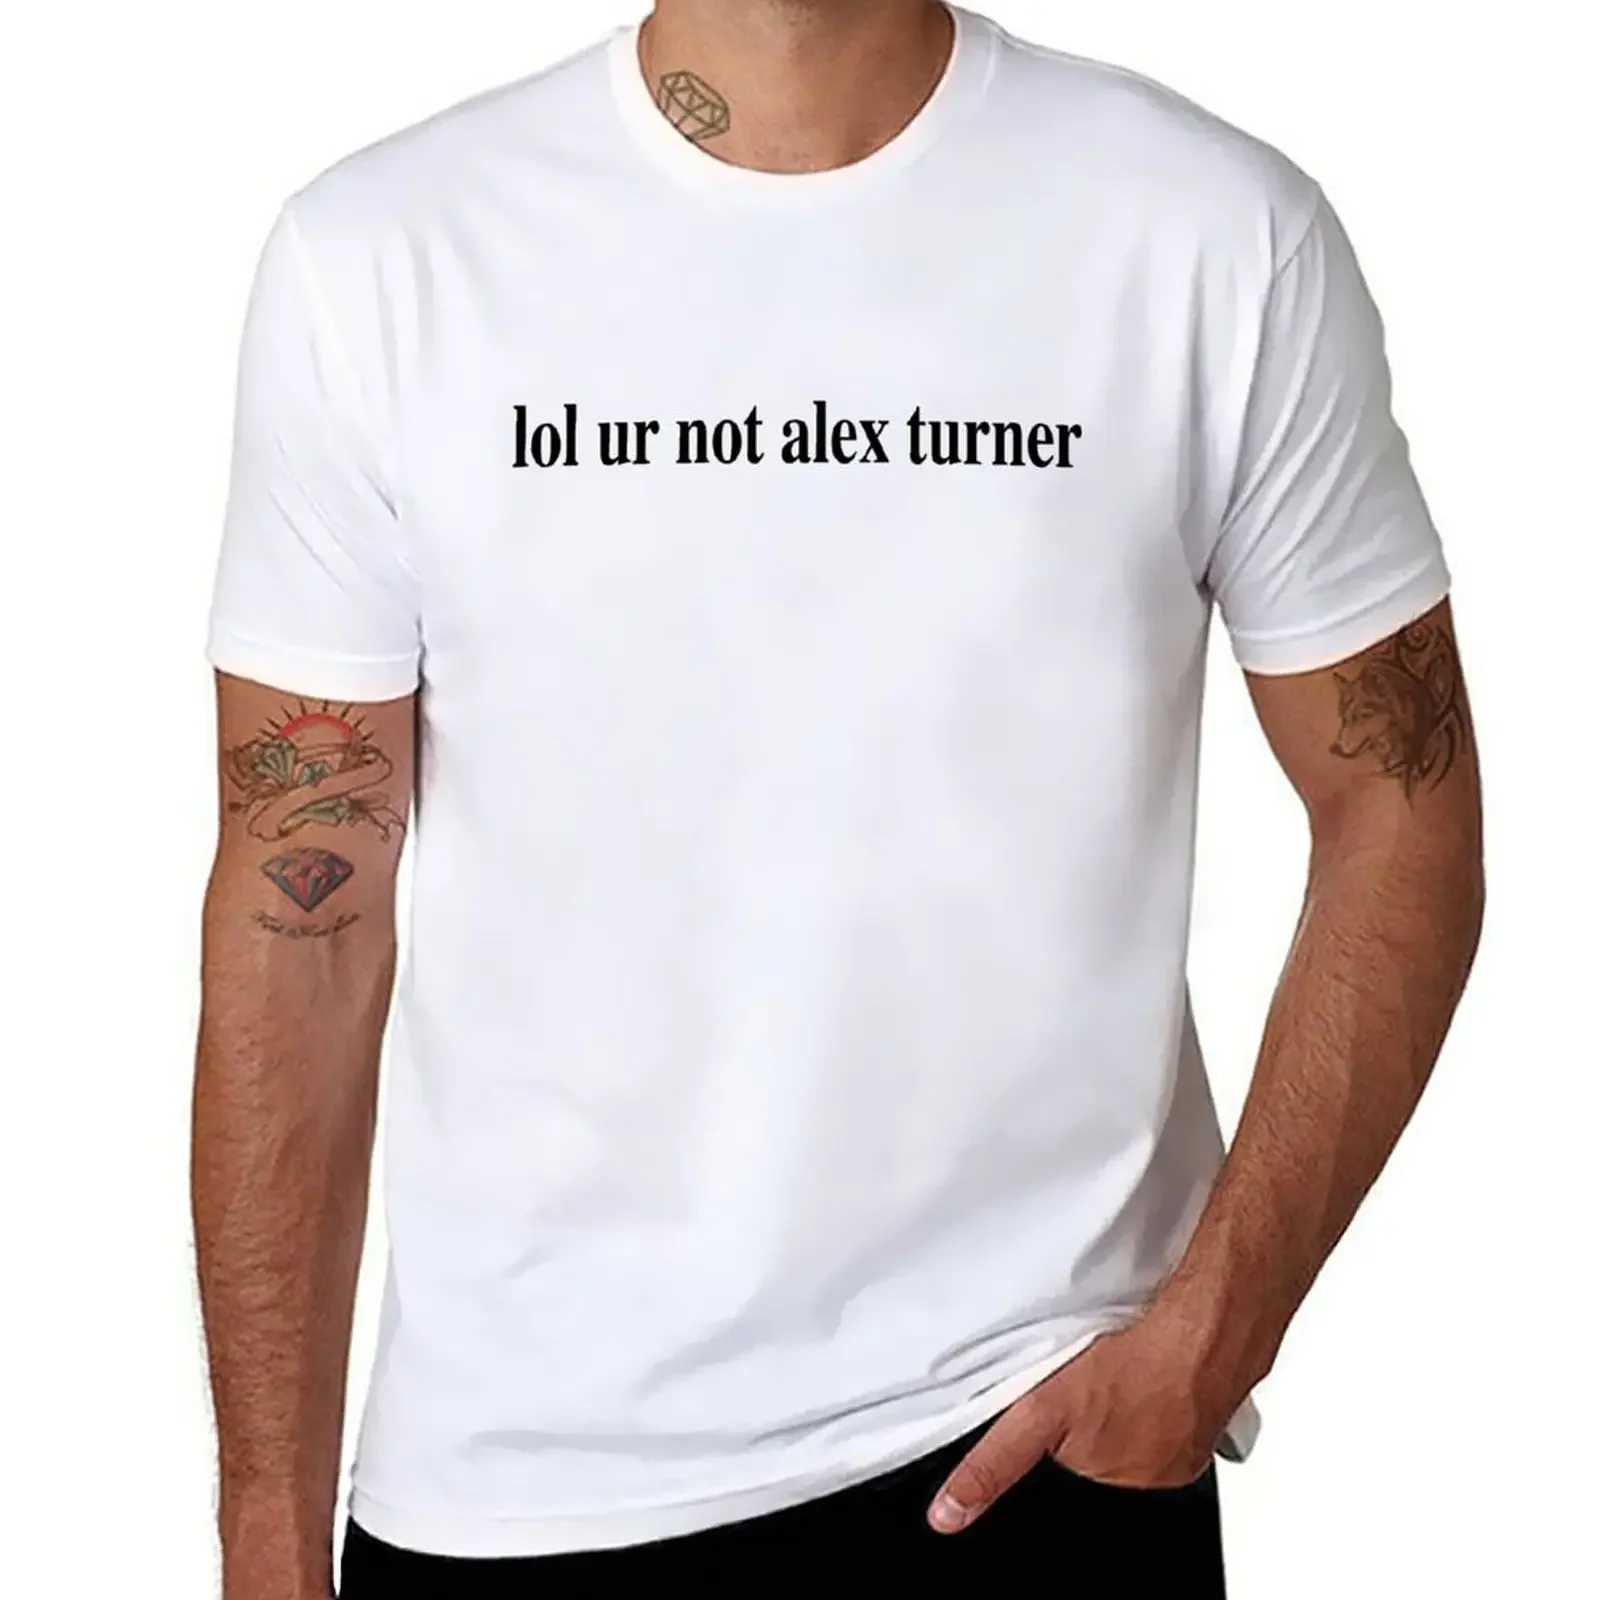 

Lol ur not alex turner T-Shirt oversizeds summer clothes customs design your own big and tall t shirts for men